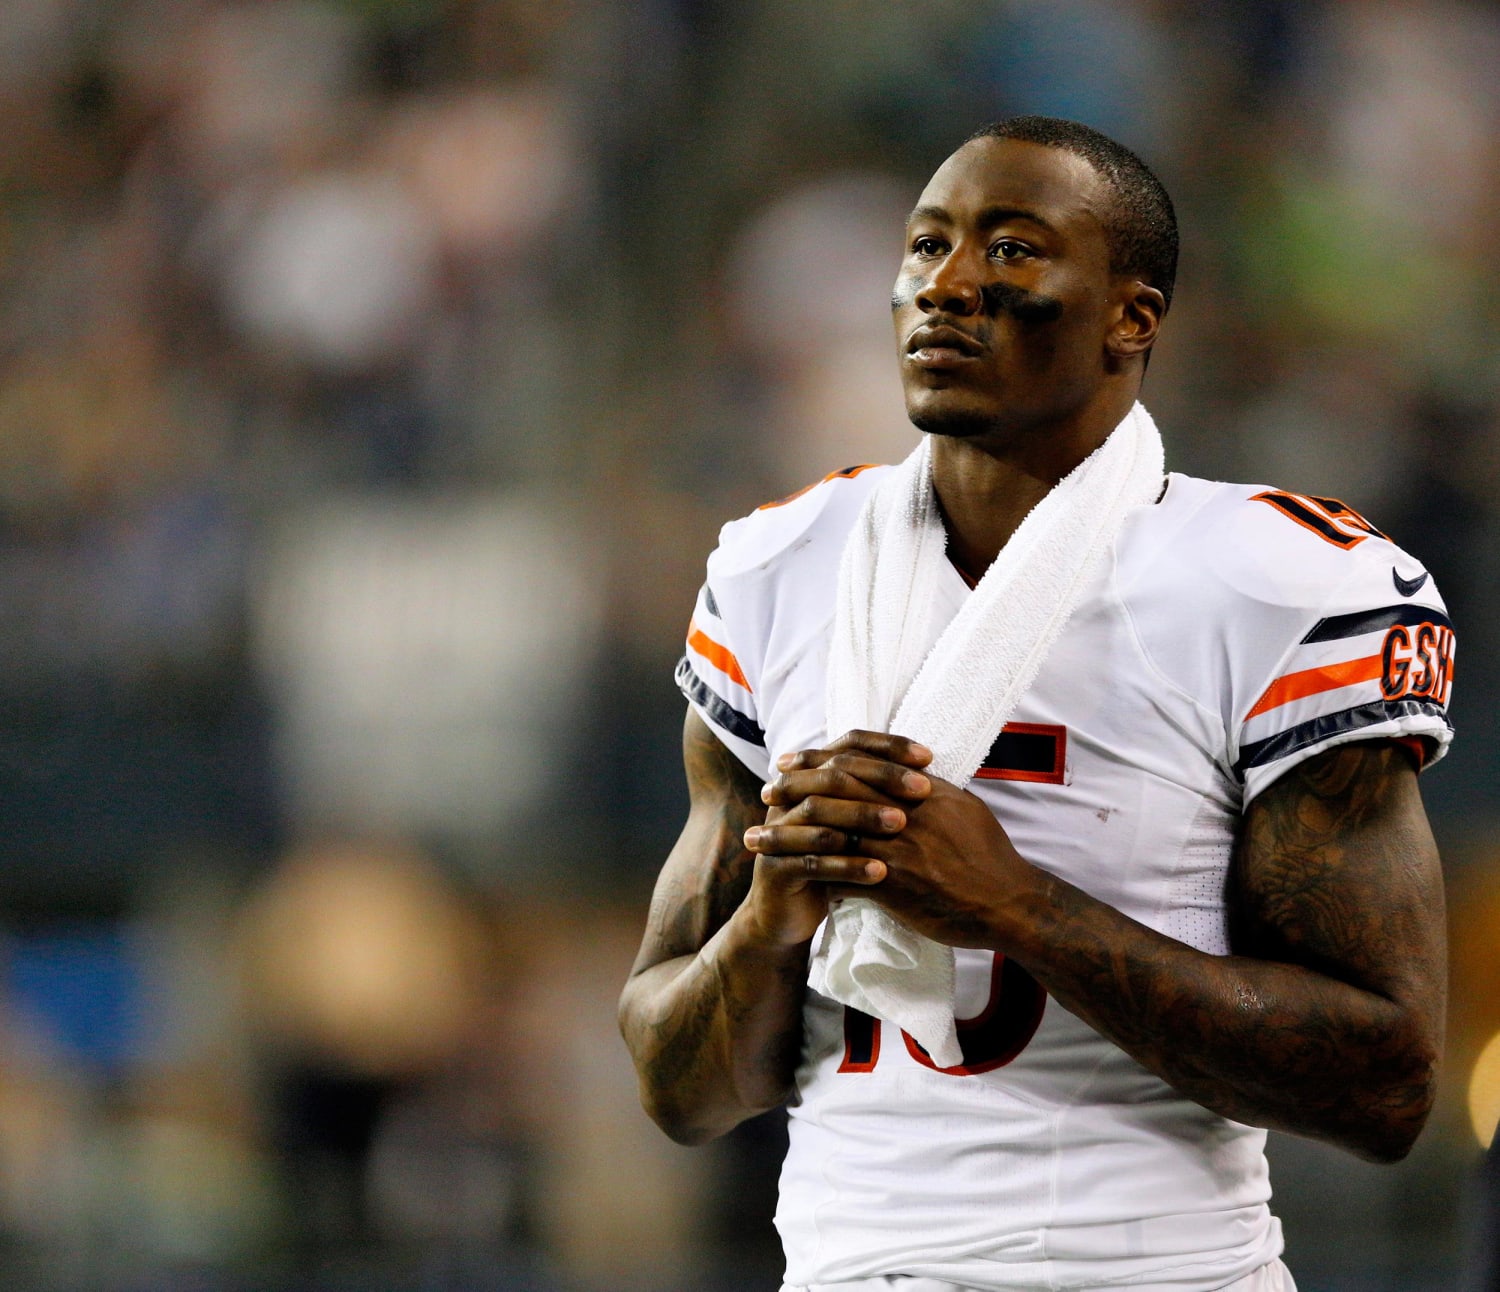 Chicago Bears' Brandon Marshall Urges Caution on NFL Violence Cases